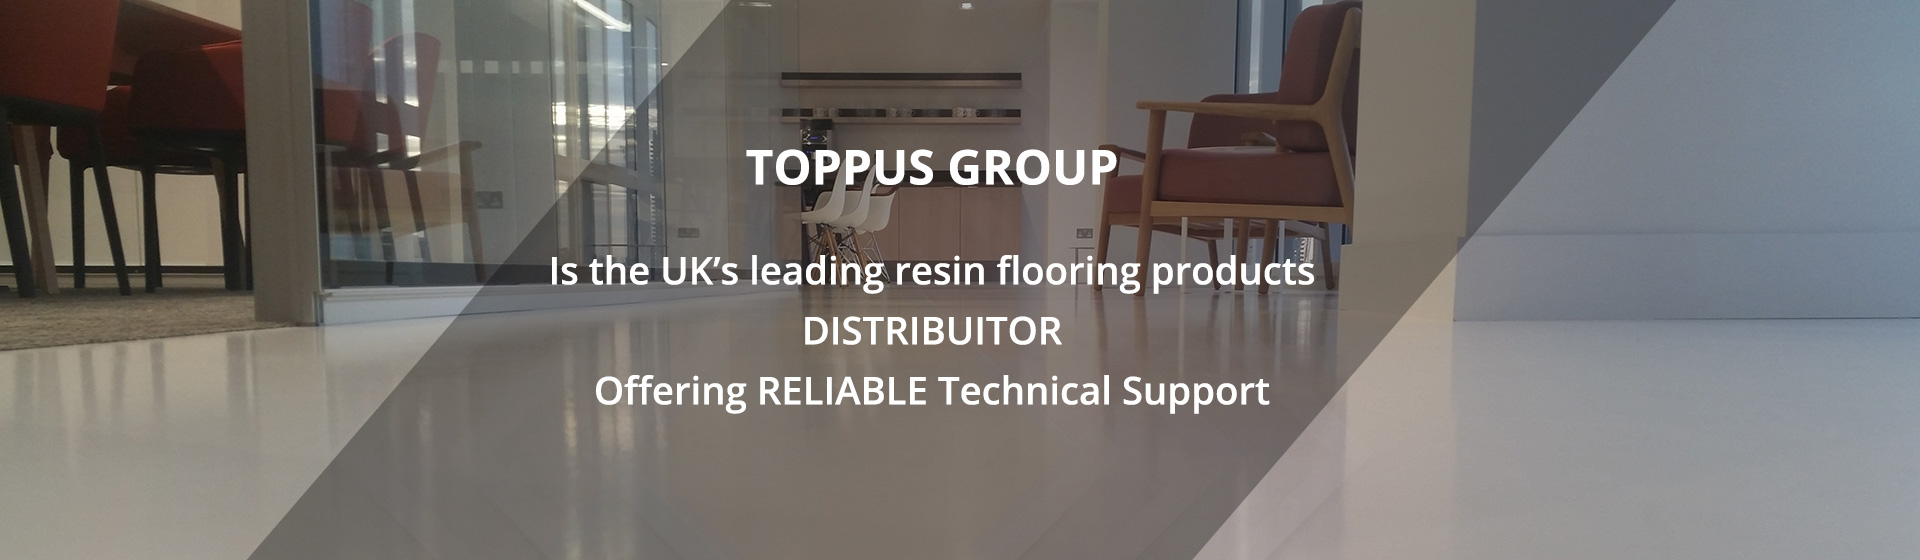 Contact Toppus Group